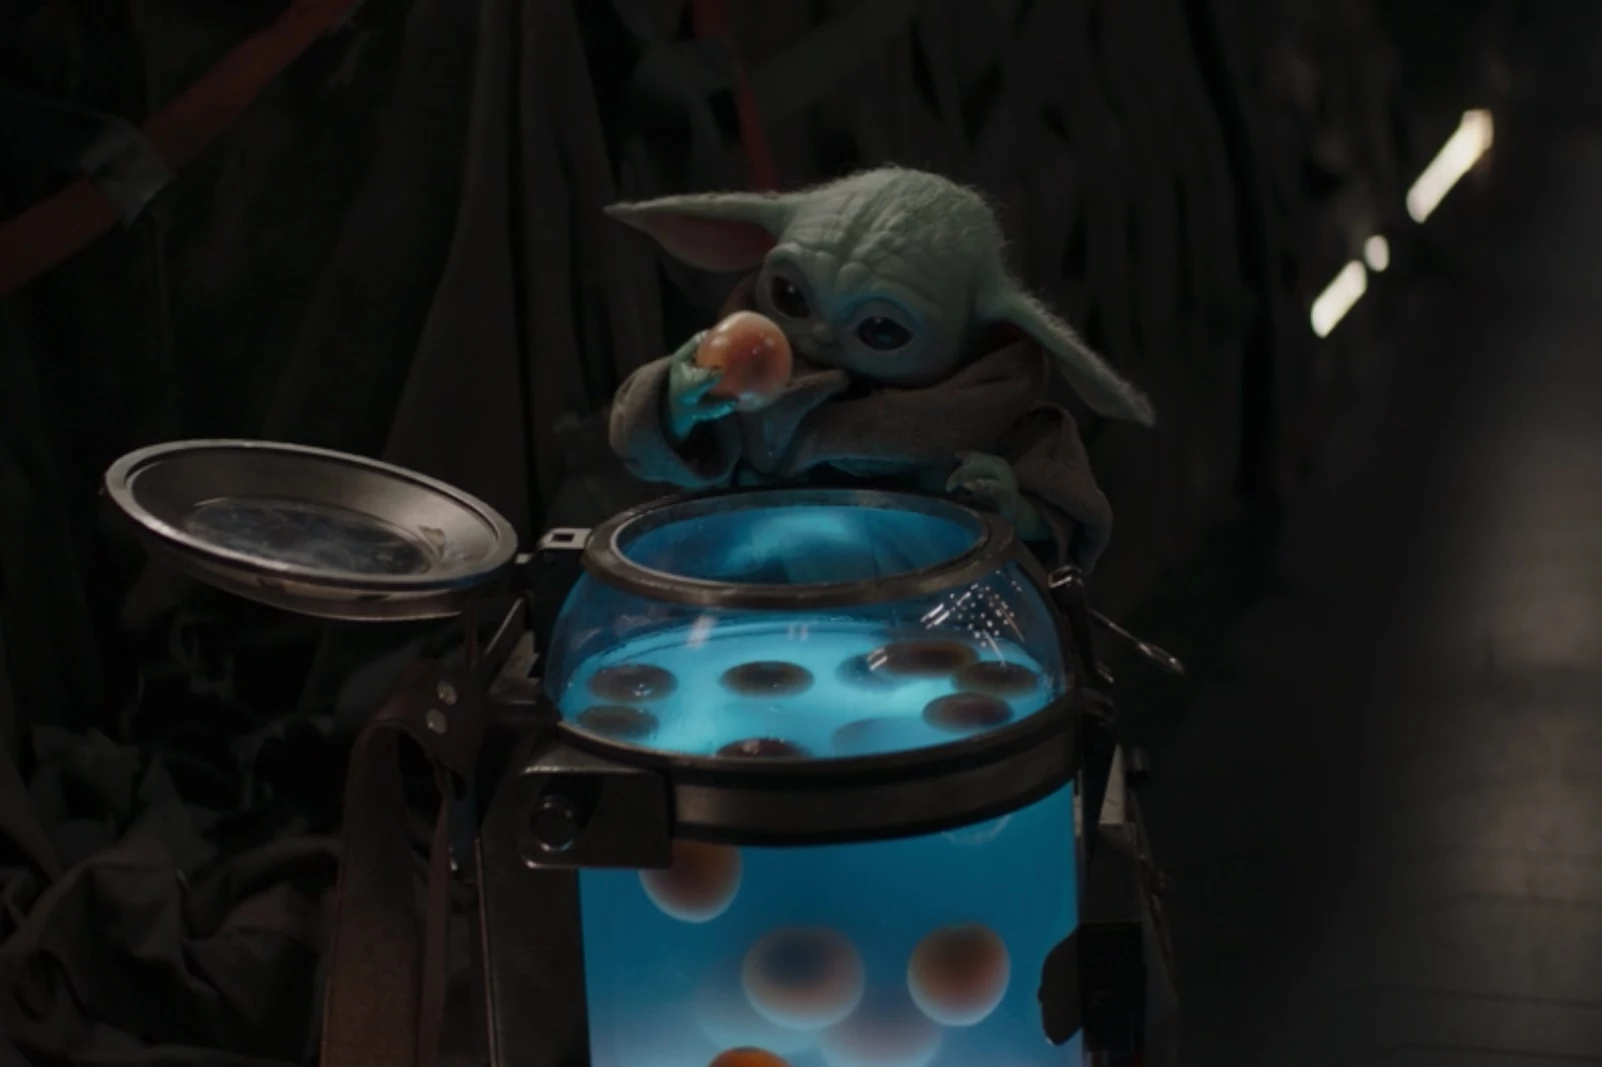 Images Of Baby Yoda Eating : Baby yoda eating frog lady's eggs is ...